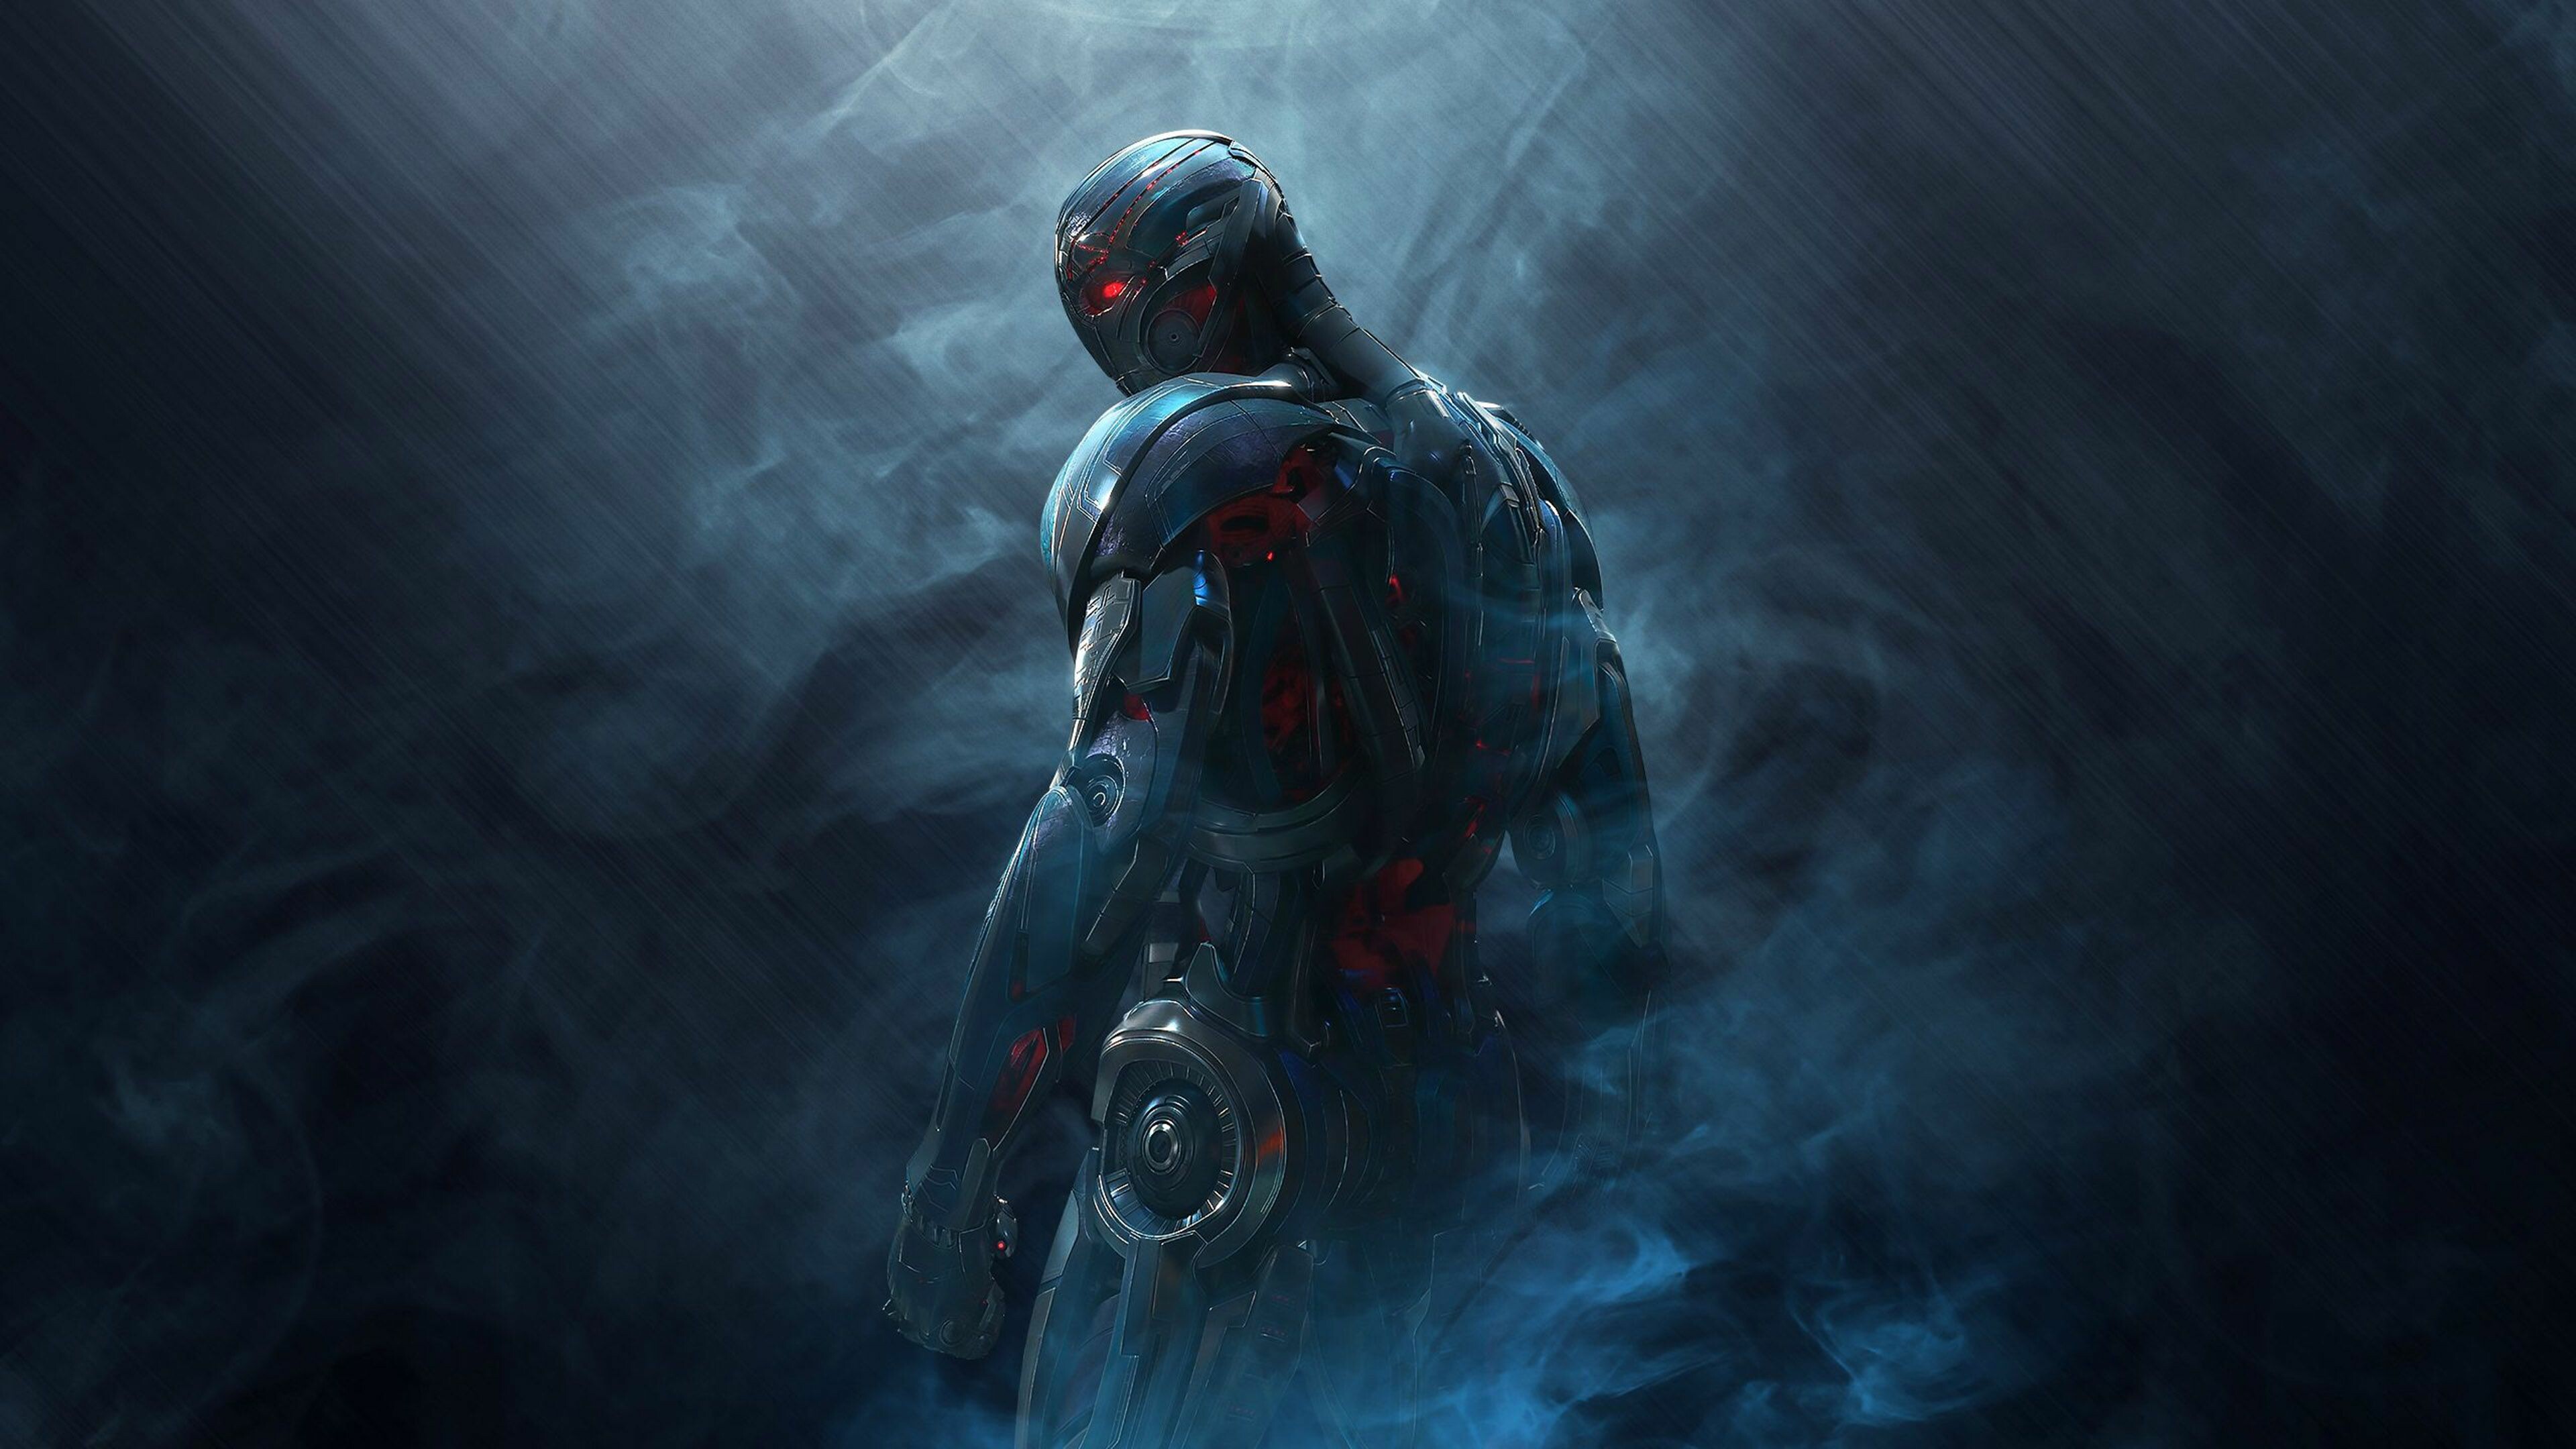 Marvel Villain: Ultron, A supervillain appearing in American comic books. 3840x2160 4K Background.